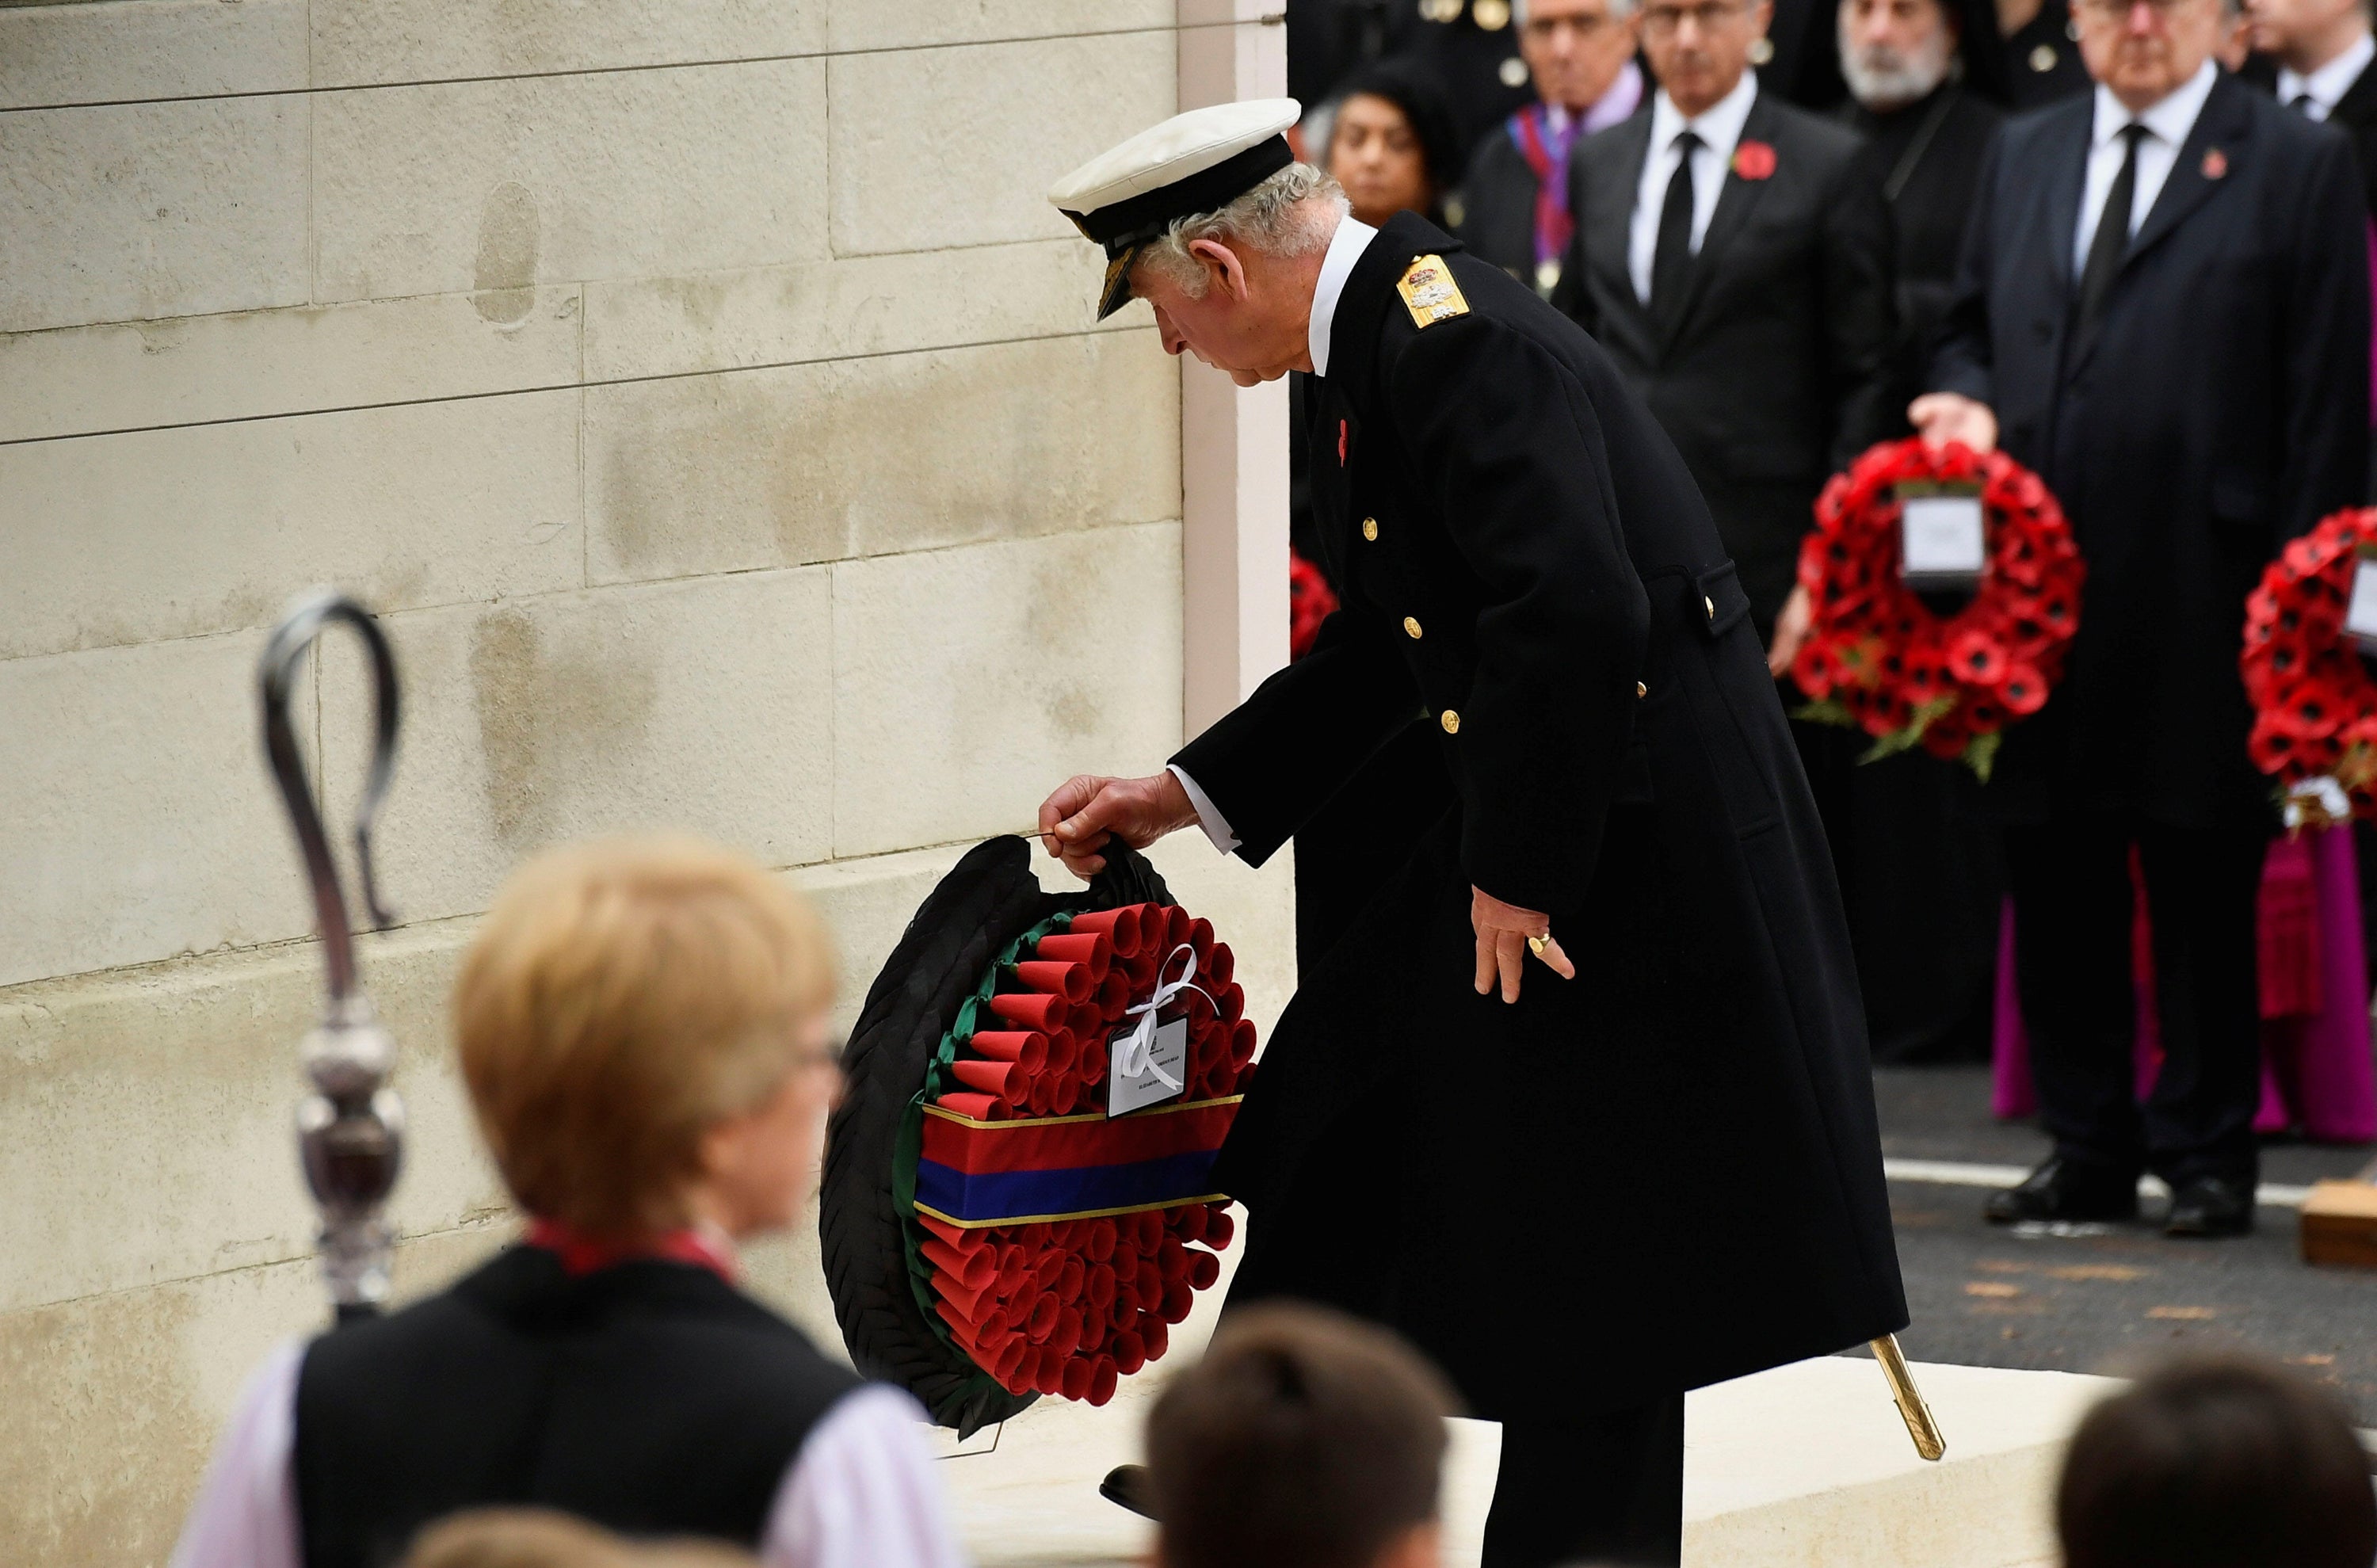 The Prince of Wales lays a wreath during the Remembrance Sunday service at the Cenotaph, in Whitehall, London, in November (Toby Melville/PA)